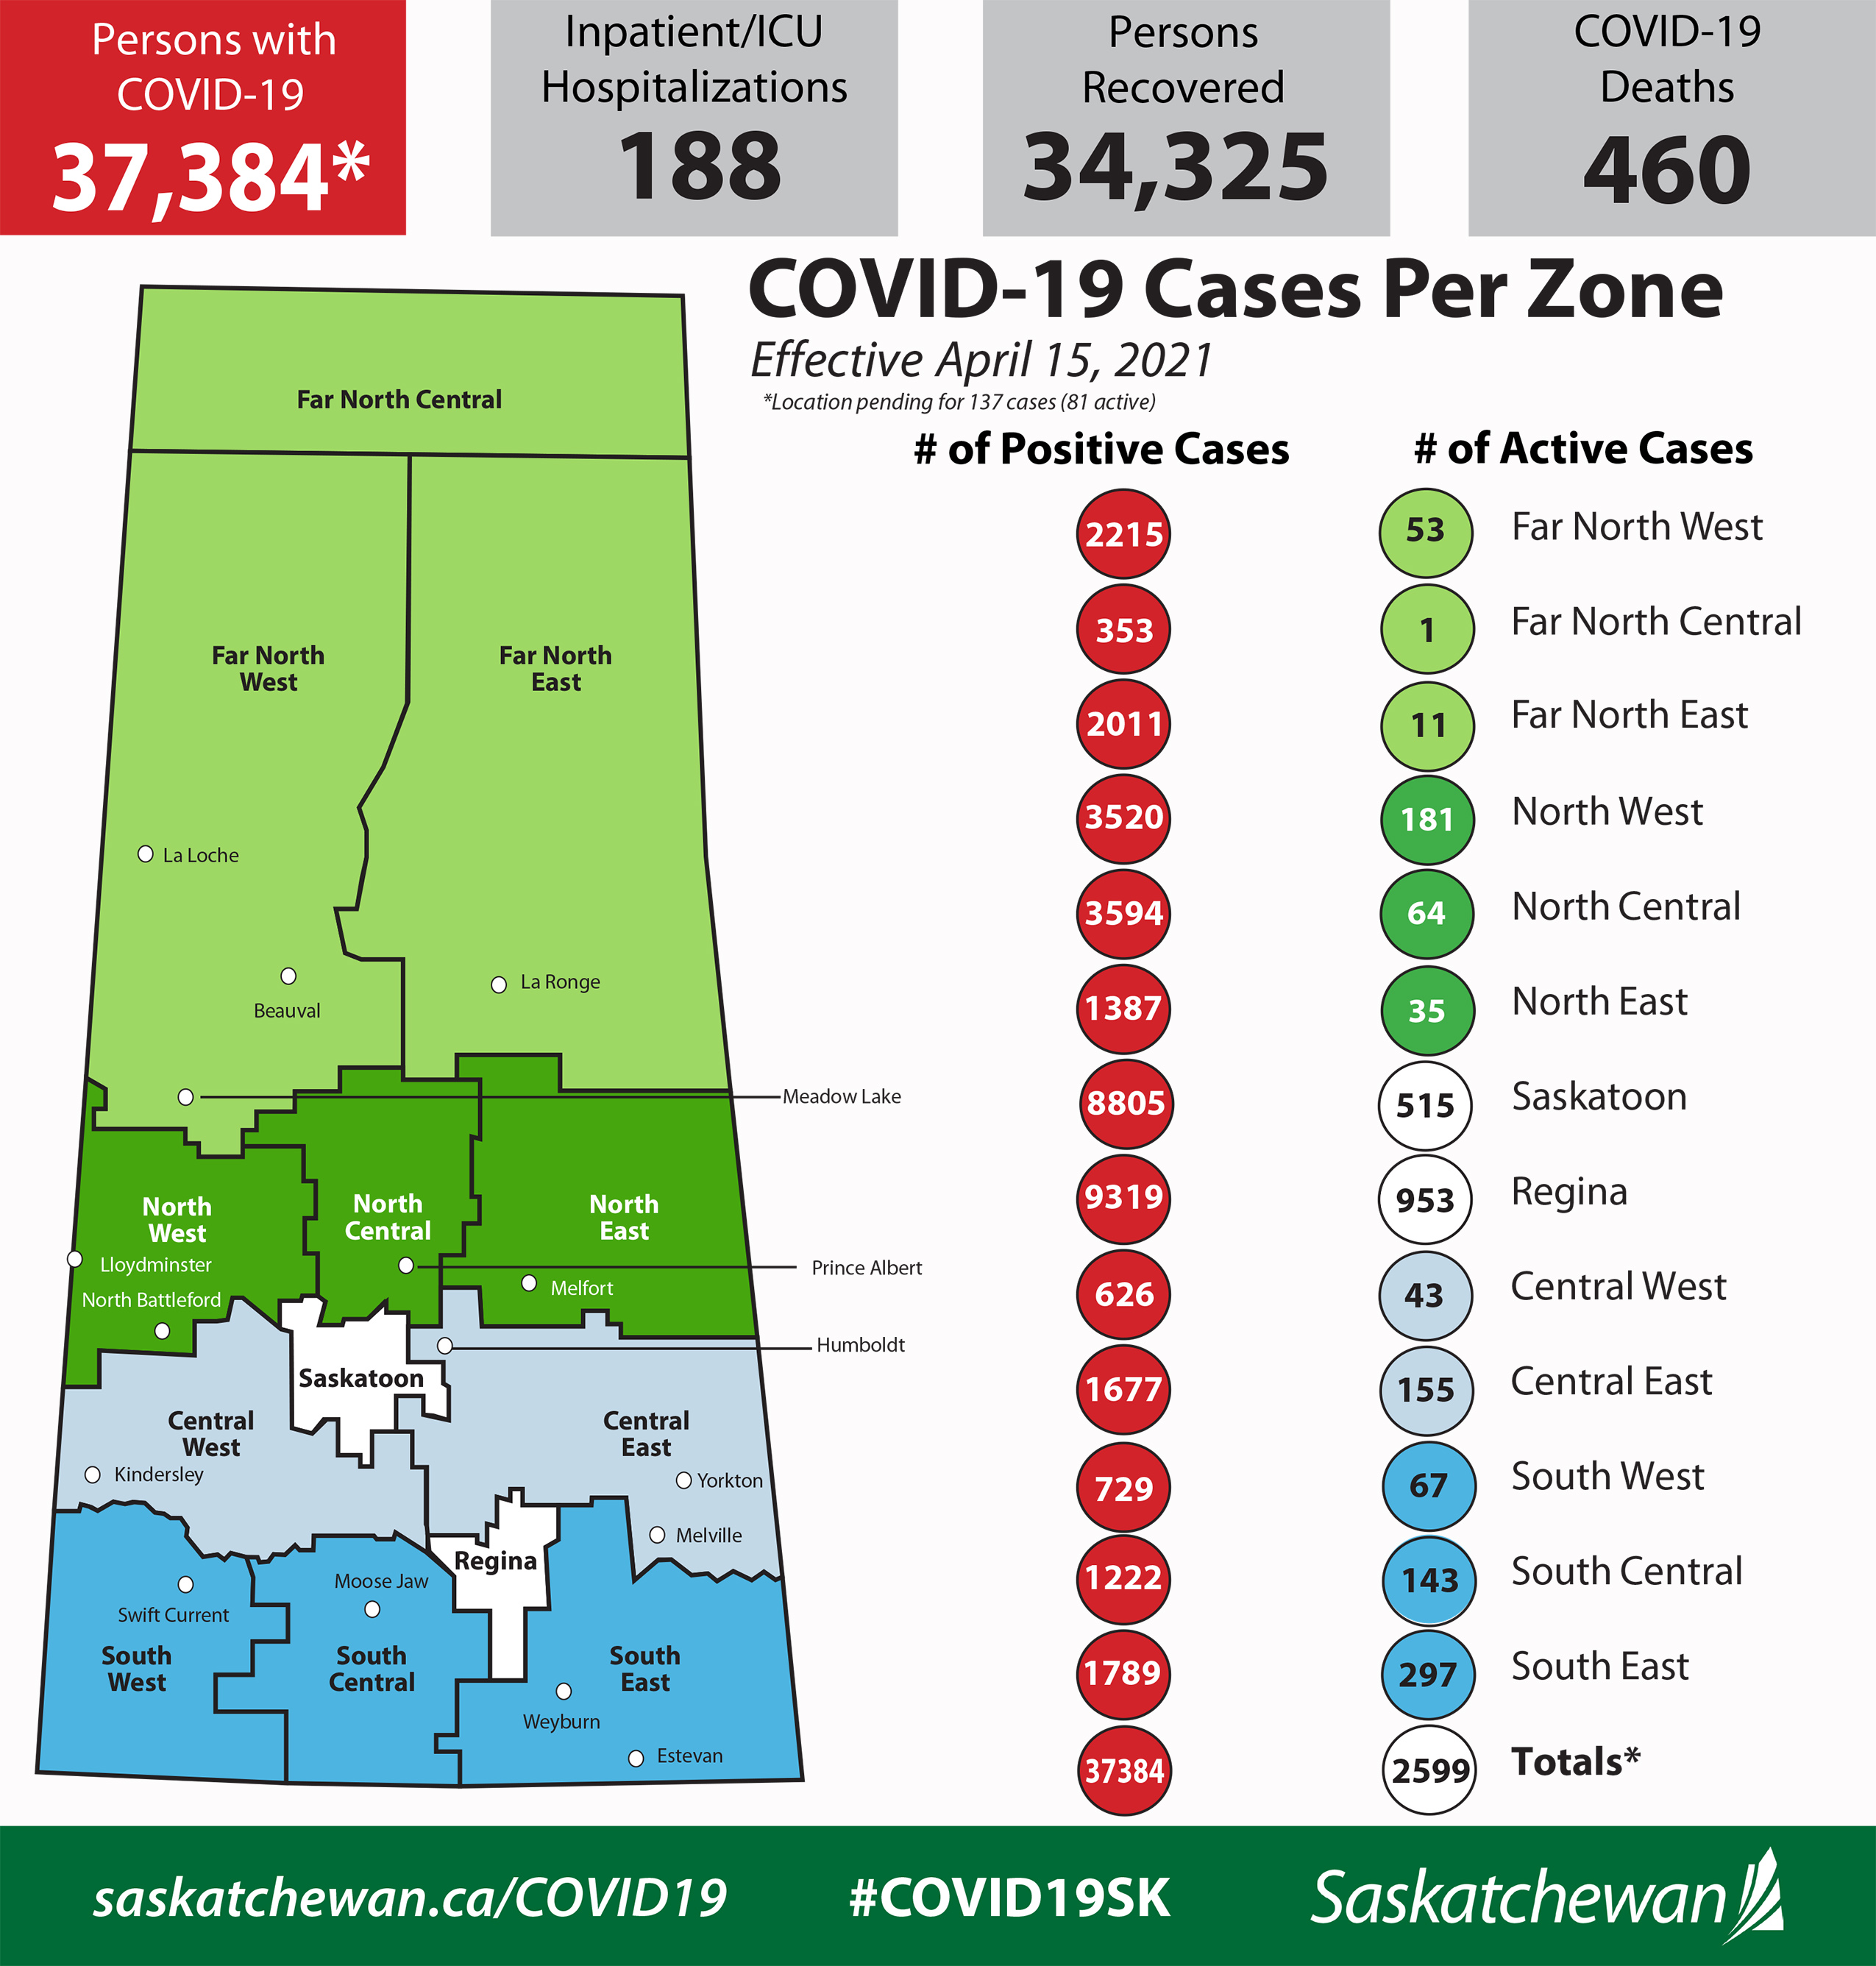 COVID-19 Update for April 15: 315,405 Vaccines Administered, 293 New Cases, 223 Recoveries, 188 in Hospital, Two New Deaths Current 7-Day Average: 284 (23.2 per 100,000) Full details: https://www.saskatchewan.ca/government/news-and-media/2021/april/15/covid19-update-for-april-15-315405-vaccines-administered-293-new-cases-223-recoveries-two-new-deaths COVID-19 Dashboard: https://dashboard.saskatchewan.ca/health-wellness